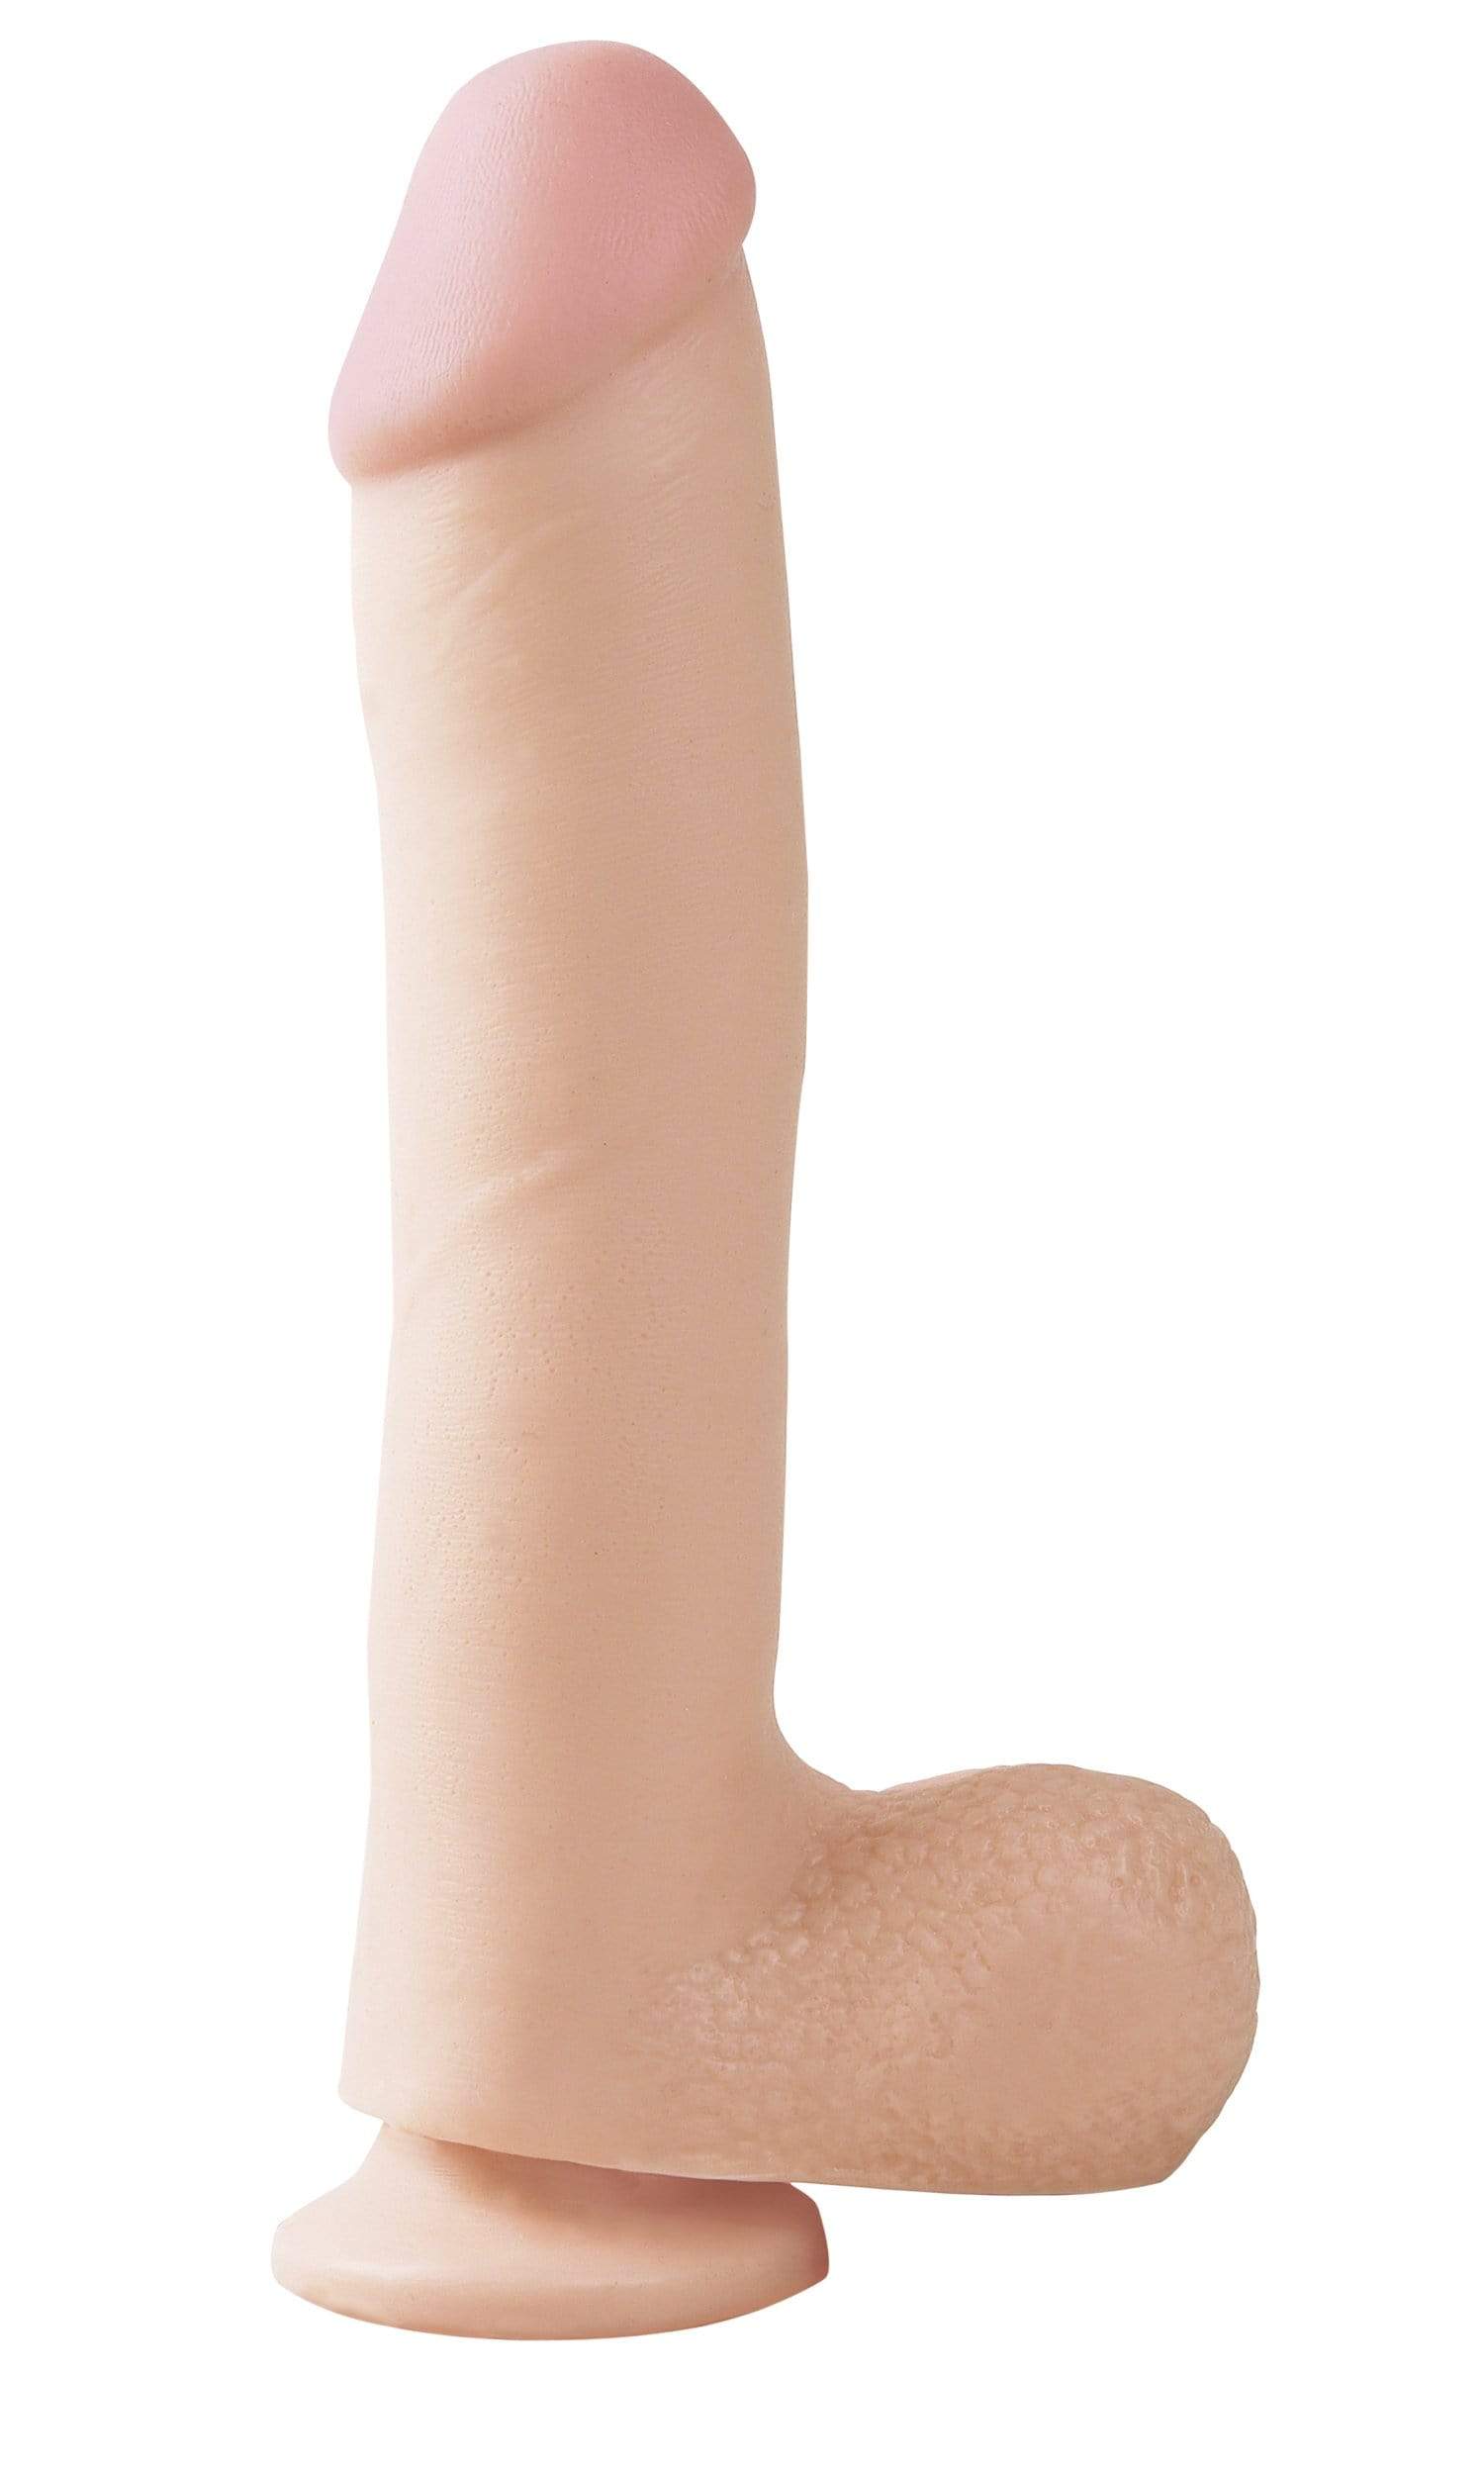 basix rubber works 10 inch dong with suction cup flesh